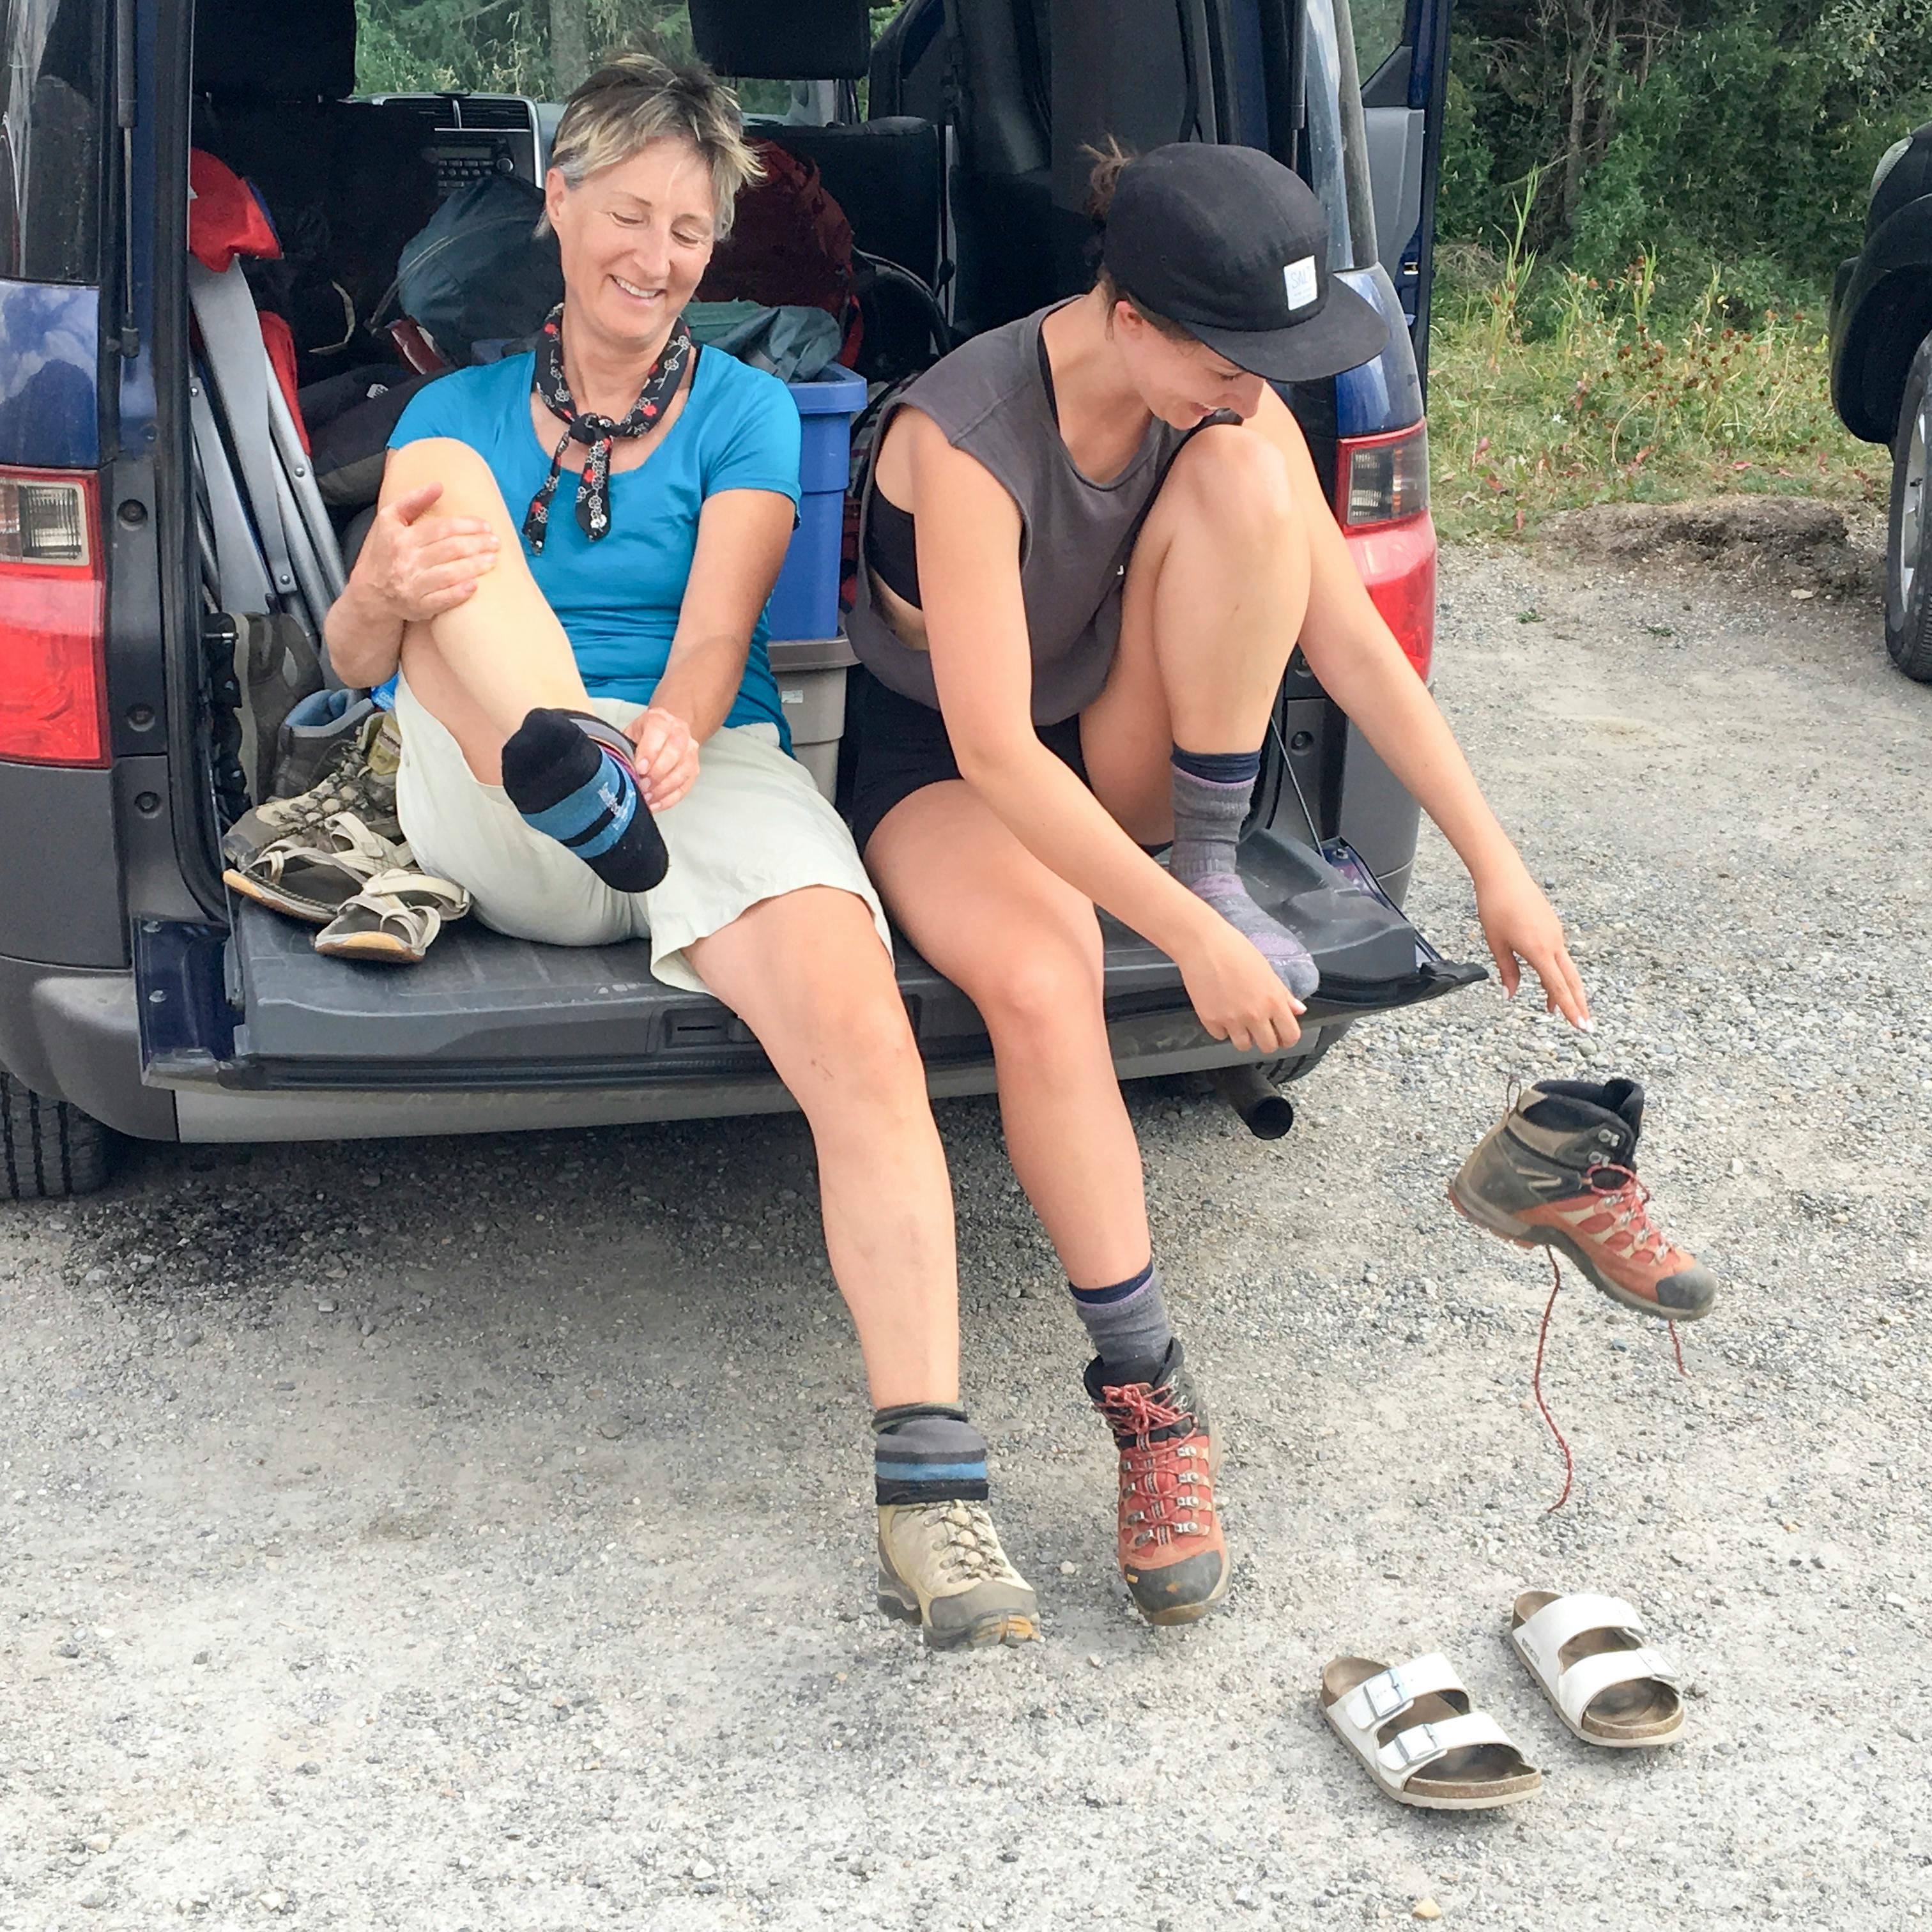 Two women sit in the back of an SUV and remove their hiking boots